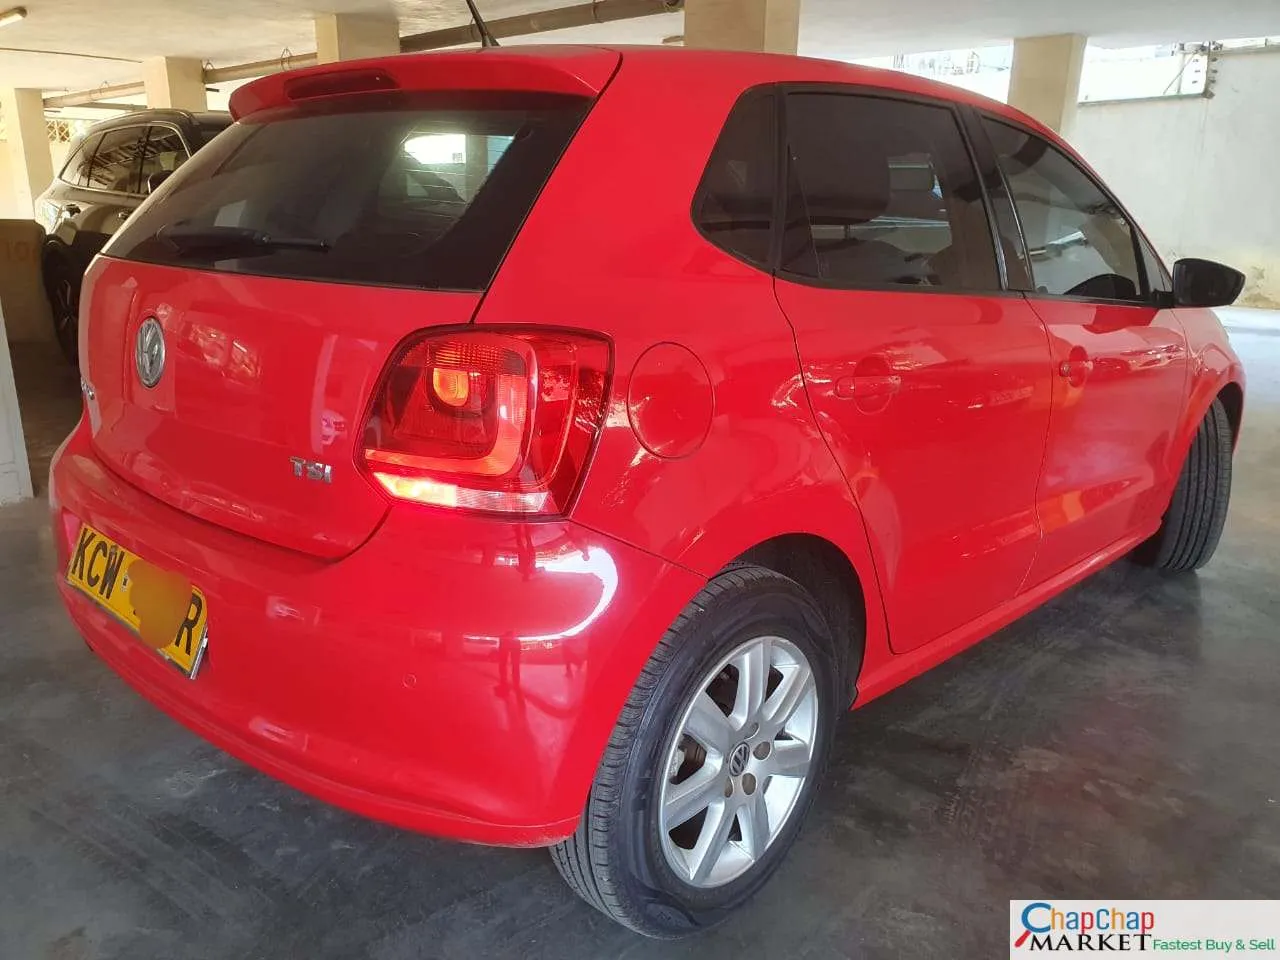 Volkswagen Polo Asian owner QUICK SALE You Pay 30% Deposit Trade in Ok Hot Hire purchase installments